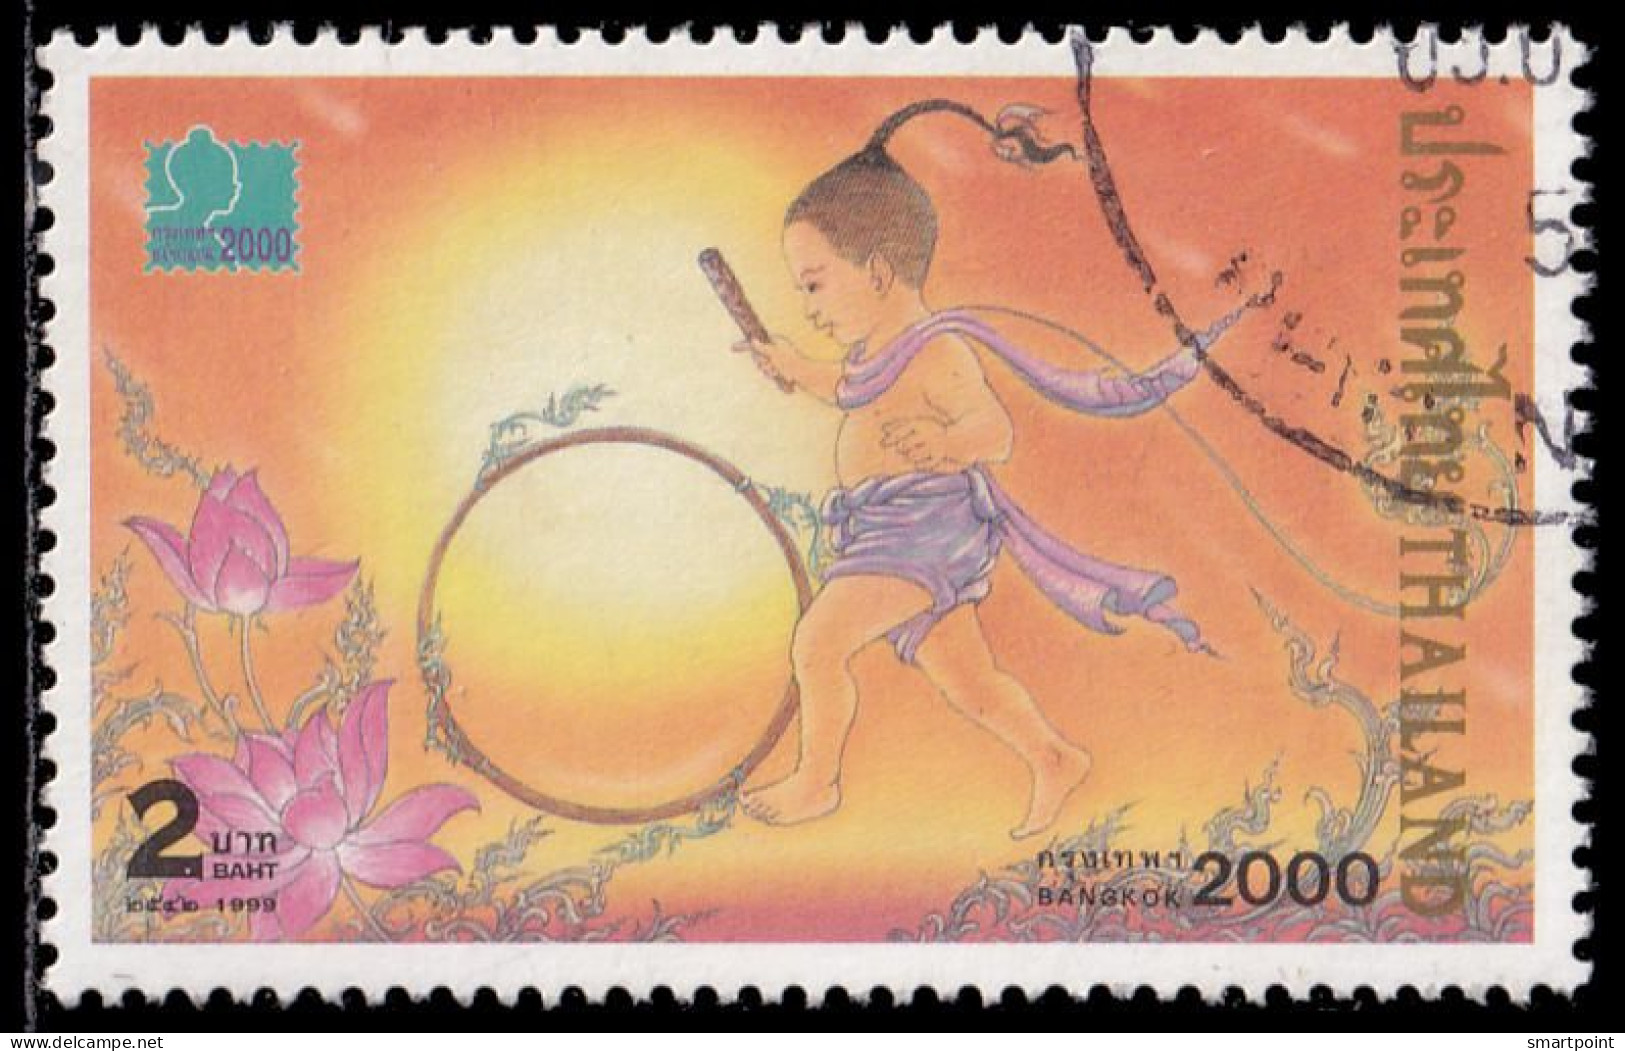 Thailand Stamp 1999 BANGKOK 2000 World Youth And 13th Asian International Stamp Exhibition (1st Series) 2 Baht - Used - Thailand